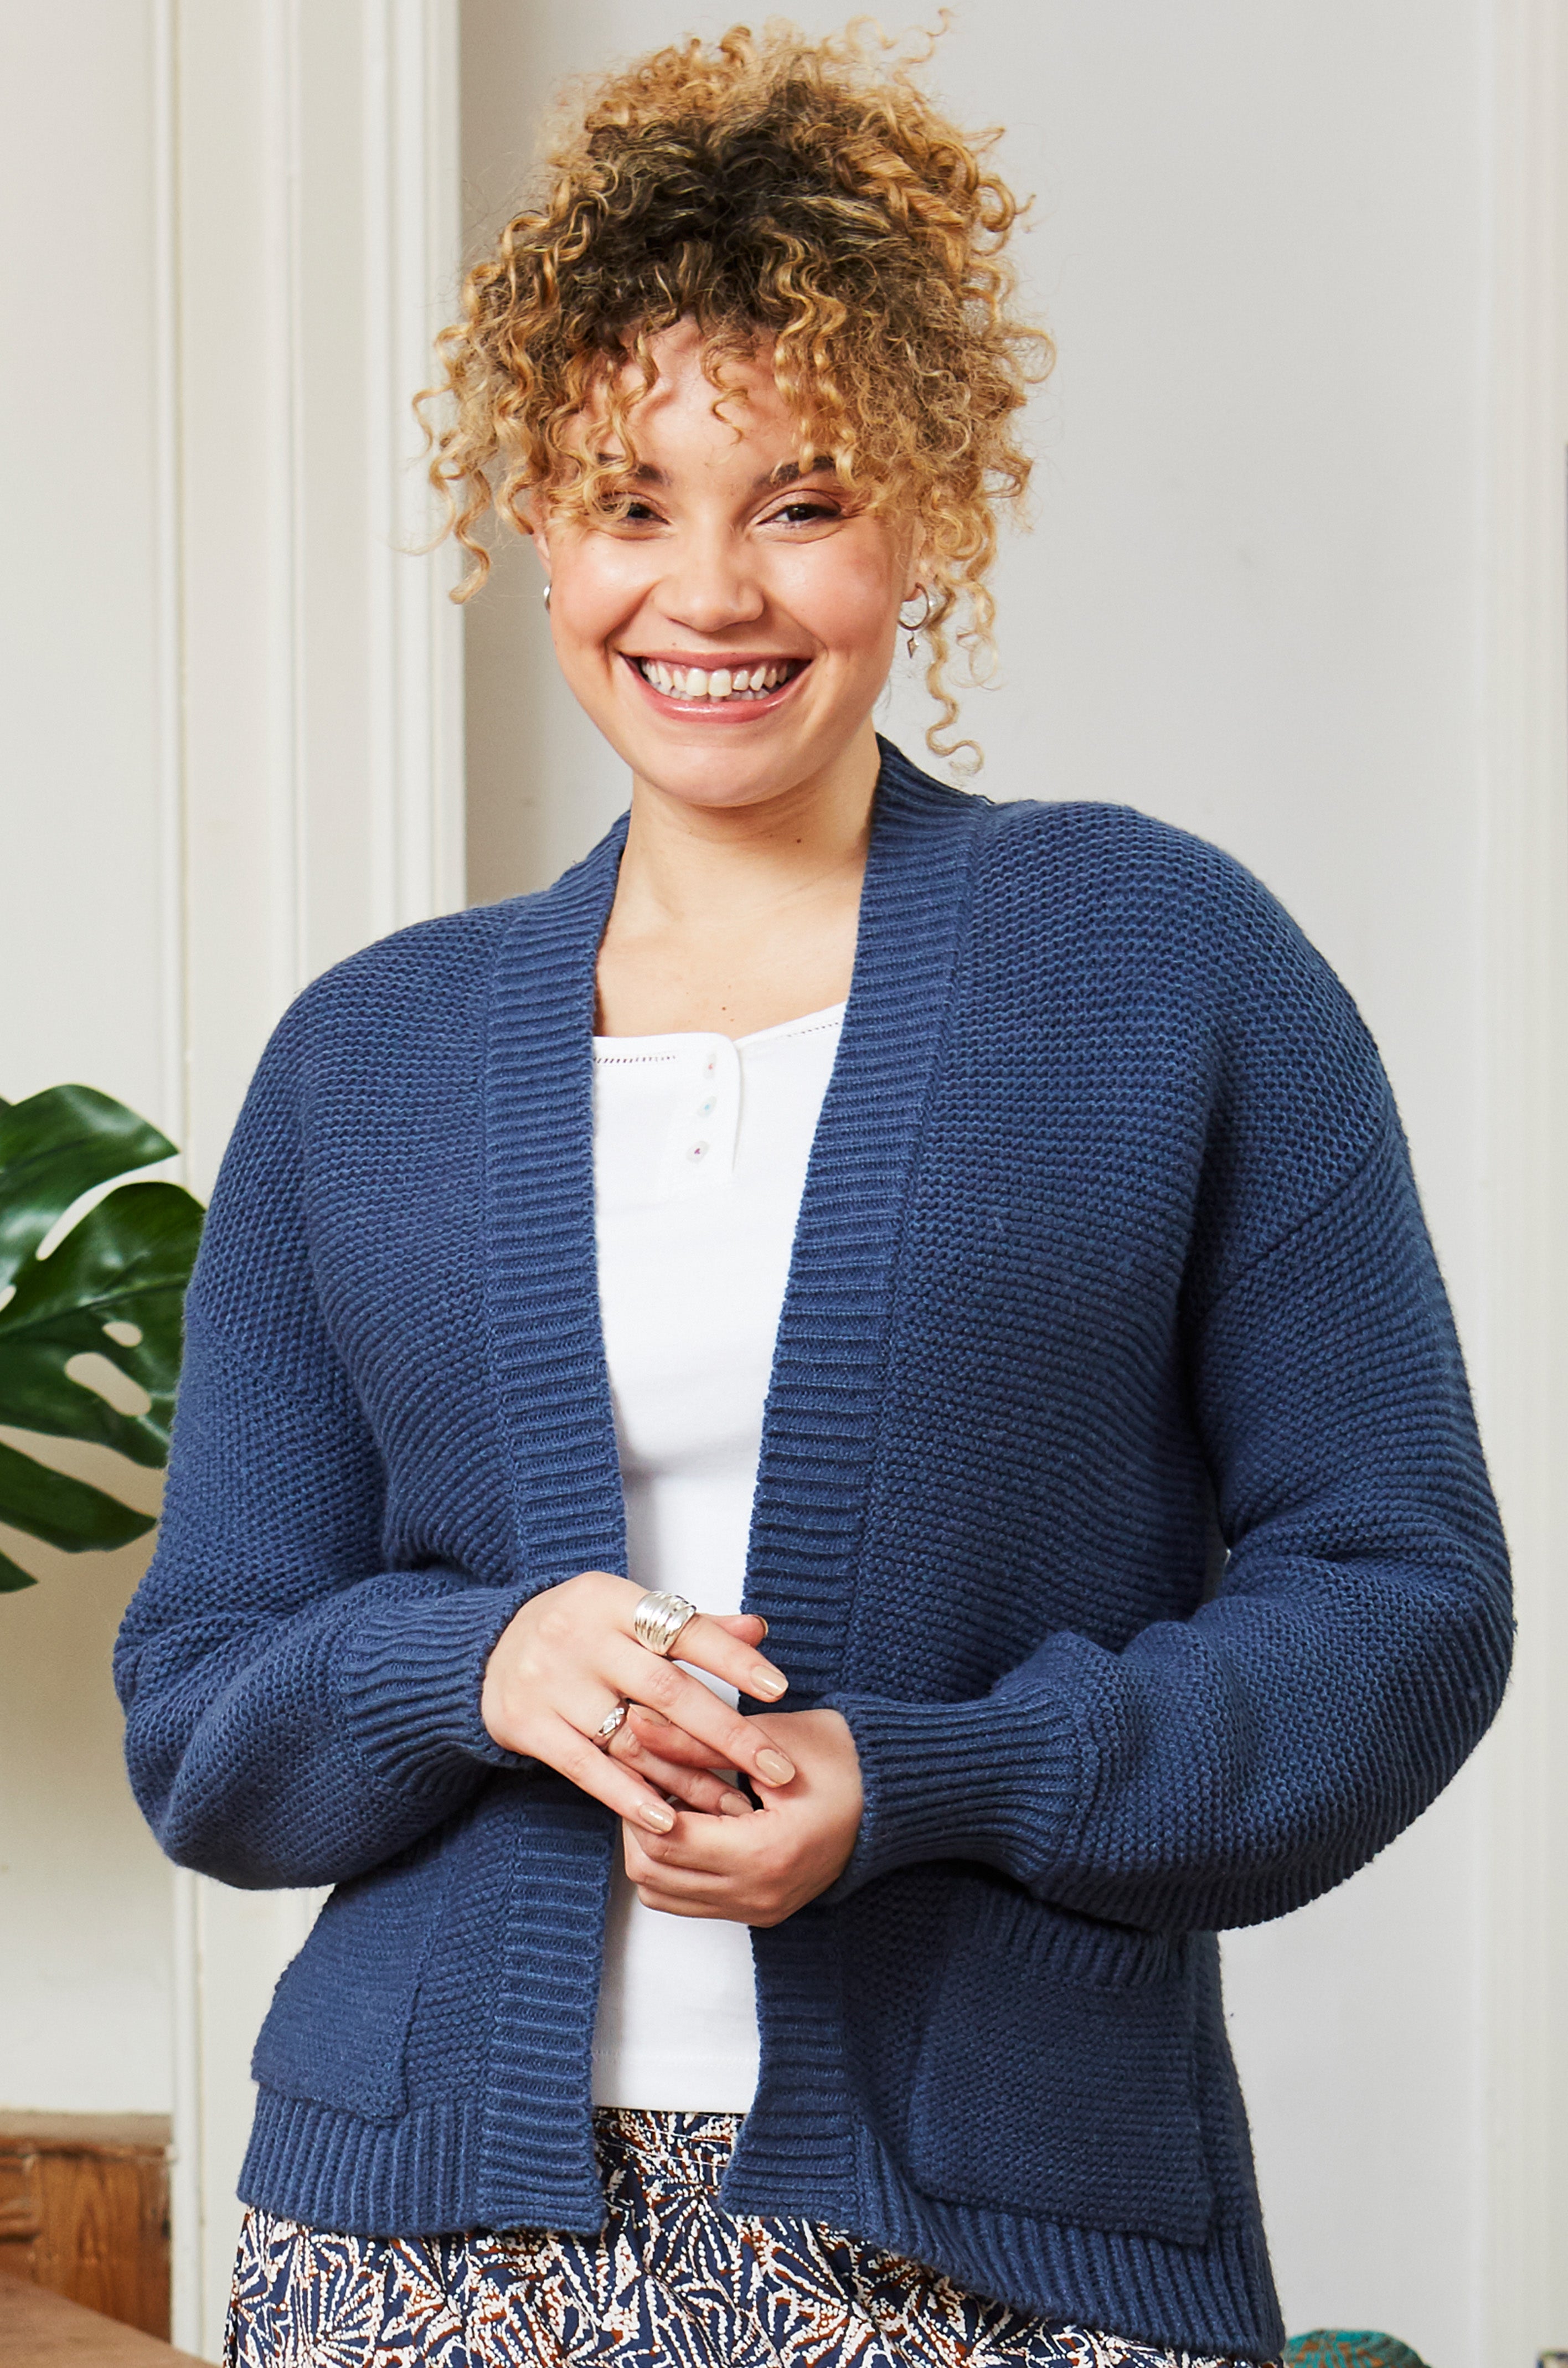 Chunky Edge to Edge Cardigan with Pockets in Ensign Blue, 10 / Ensign Blue
 